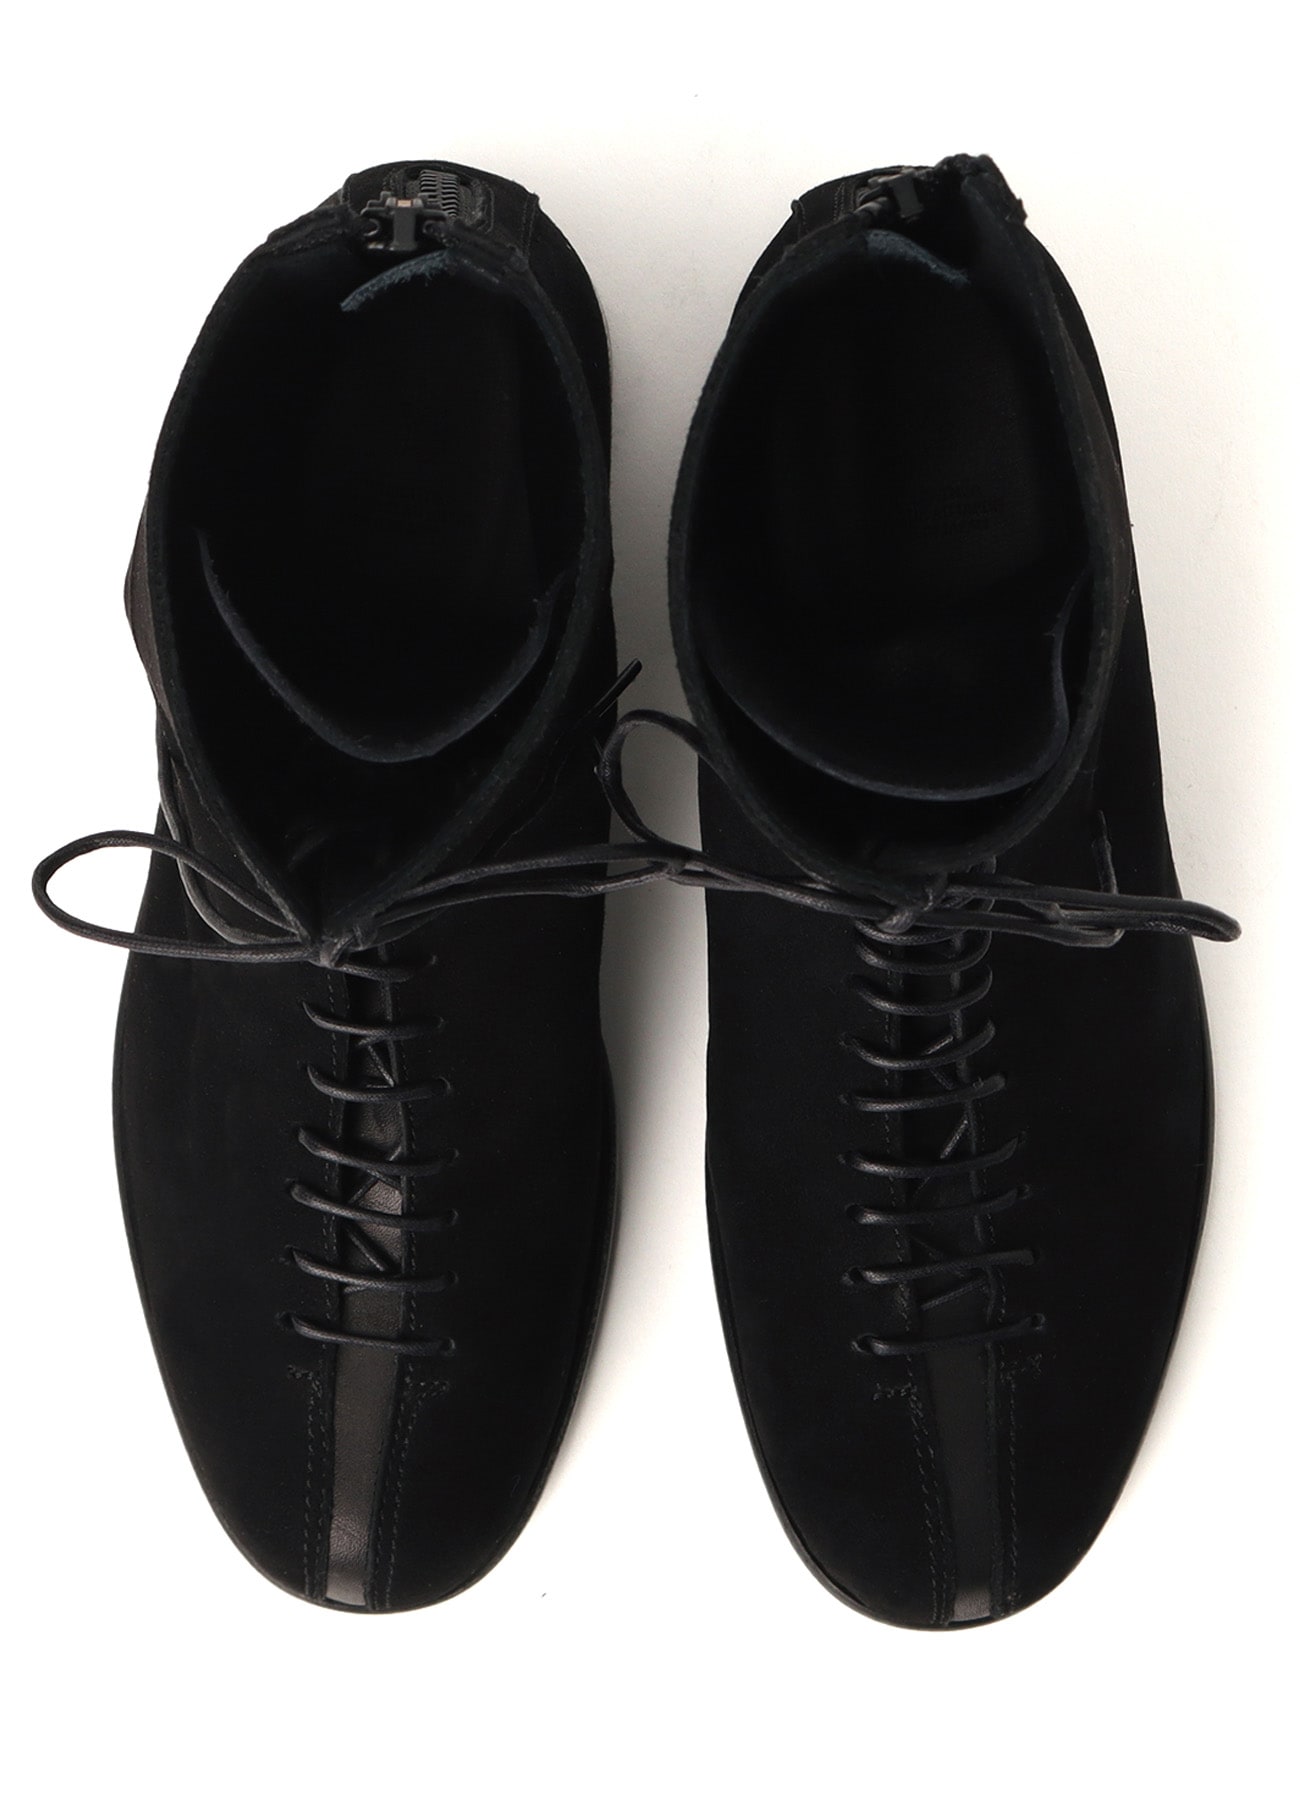 SHEEP/COW LEATHER LACE-UP SHOES